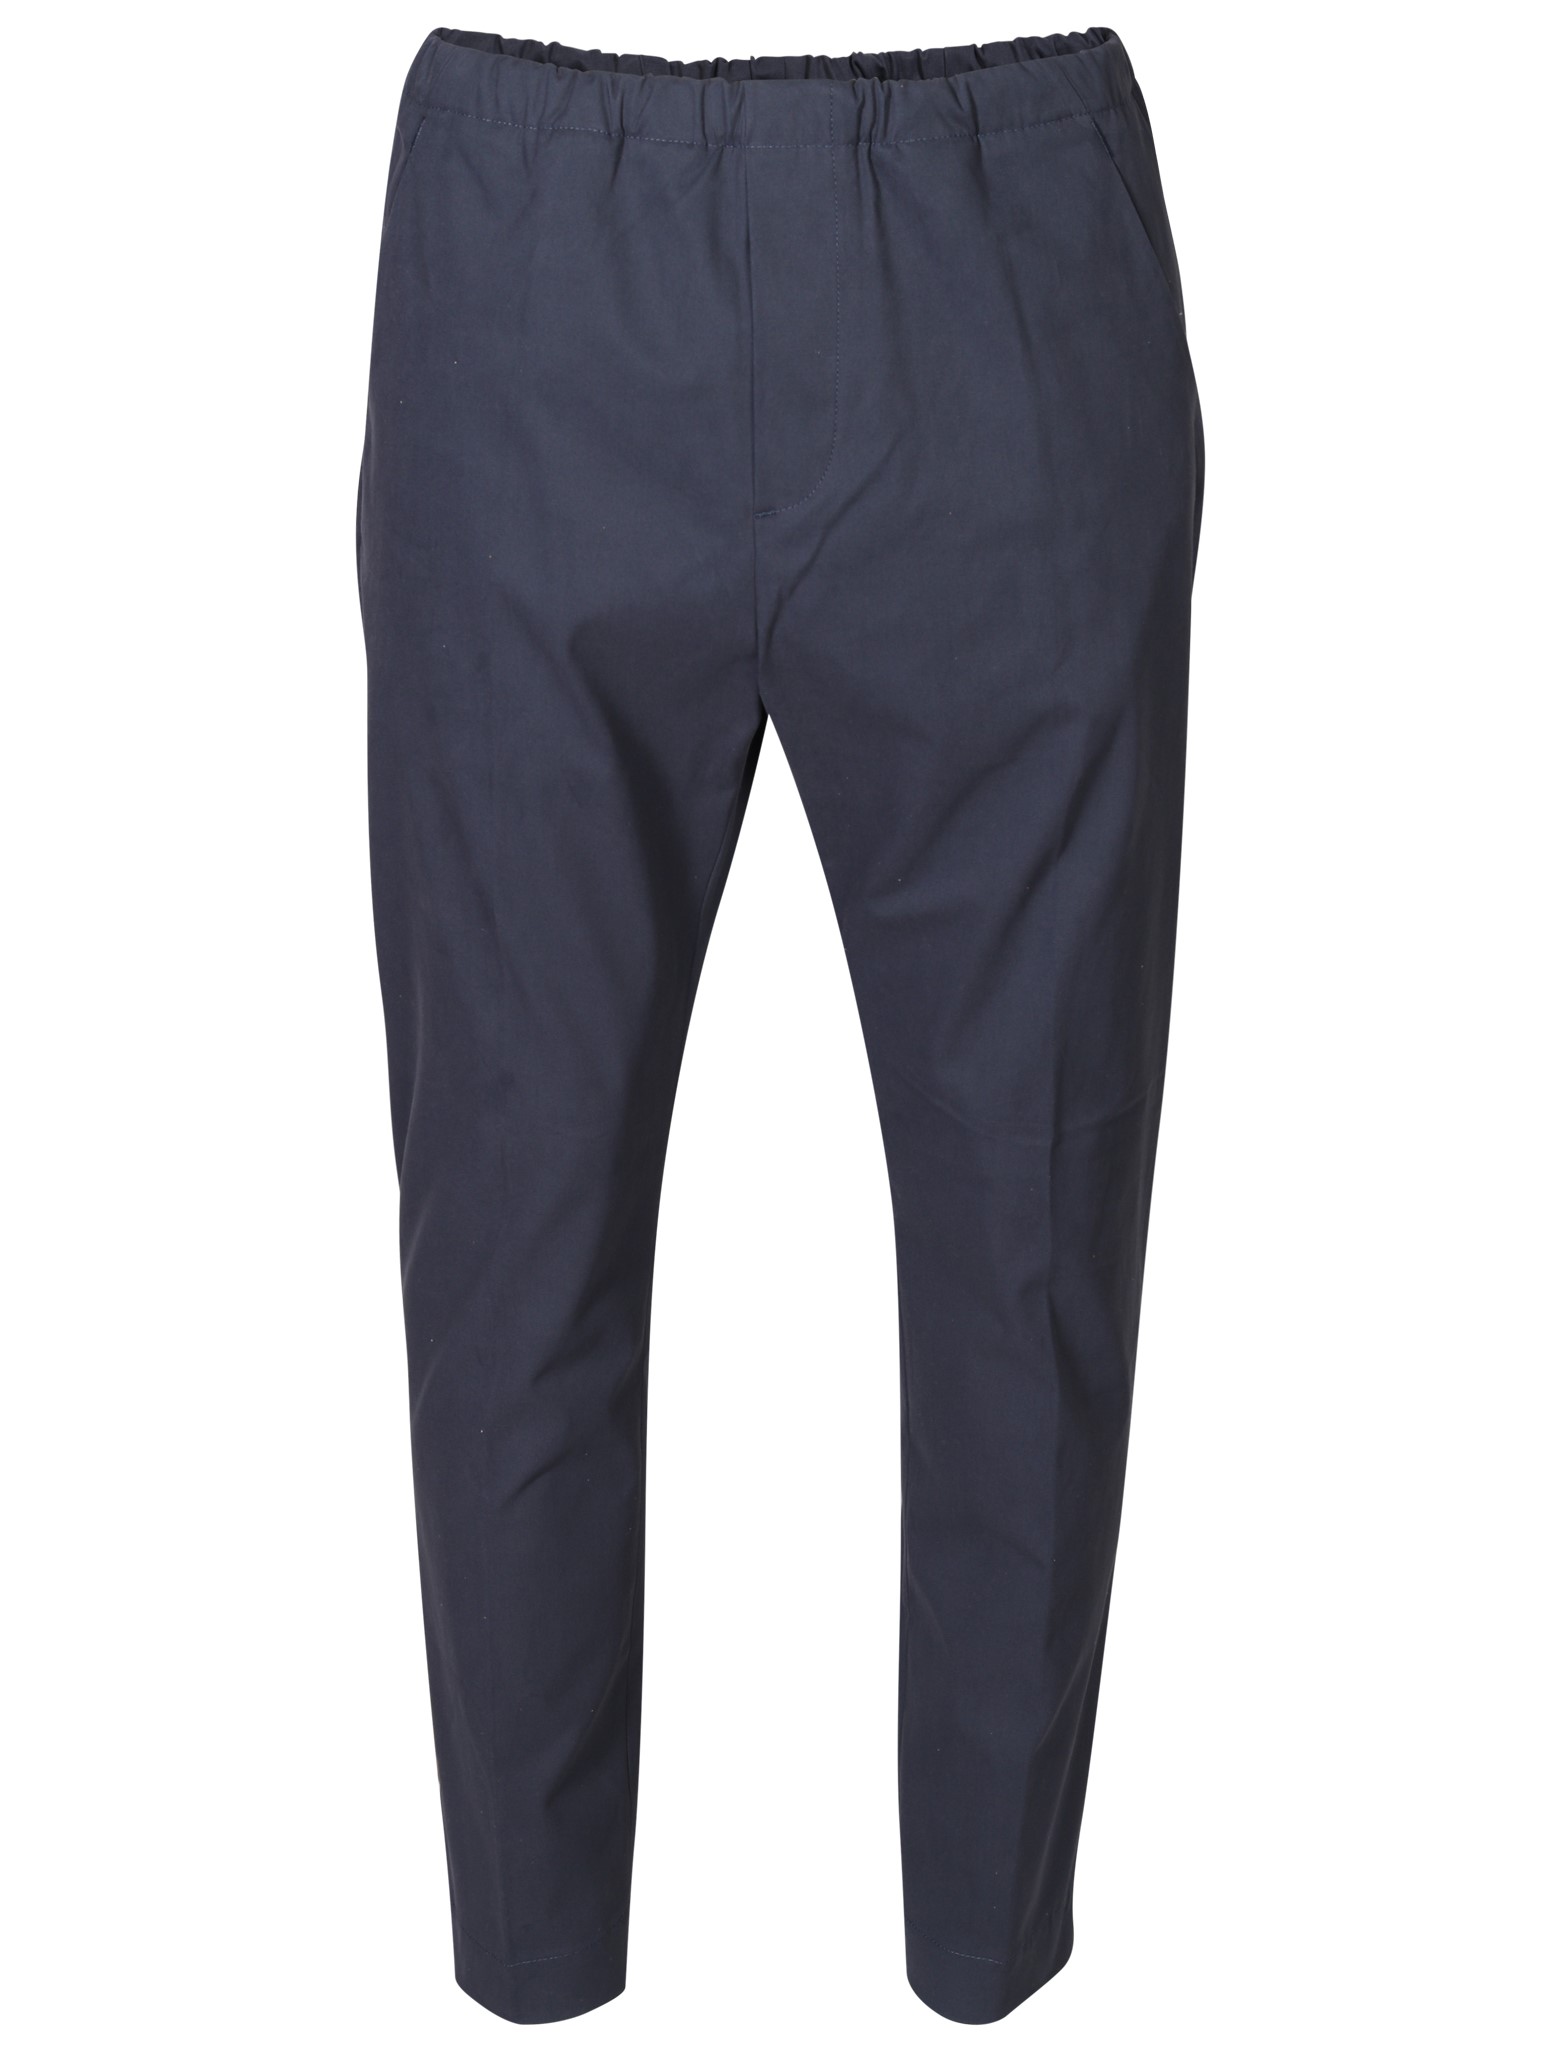 NINE:INTHE:MORNING Mirco Carrot Cotton Stretch Pant in Blue Navy